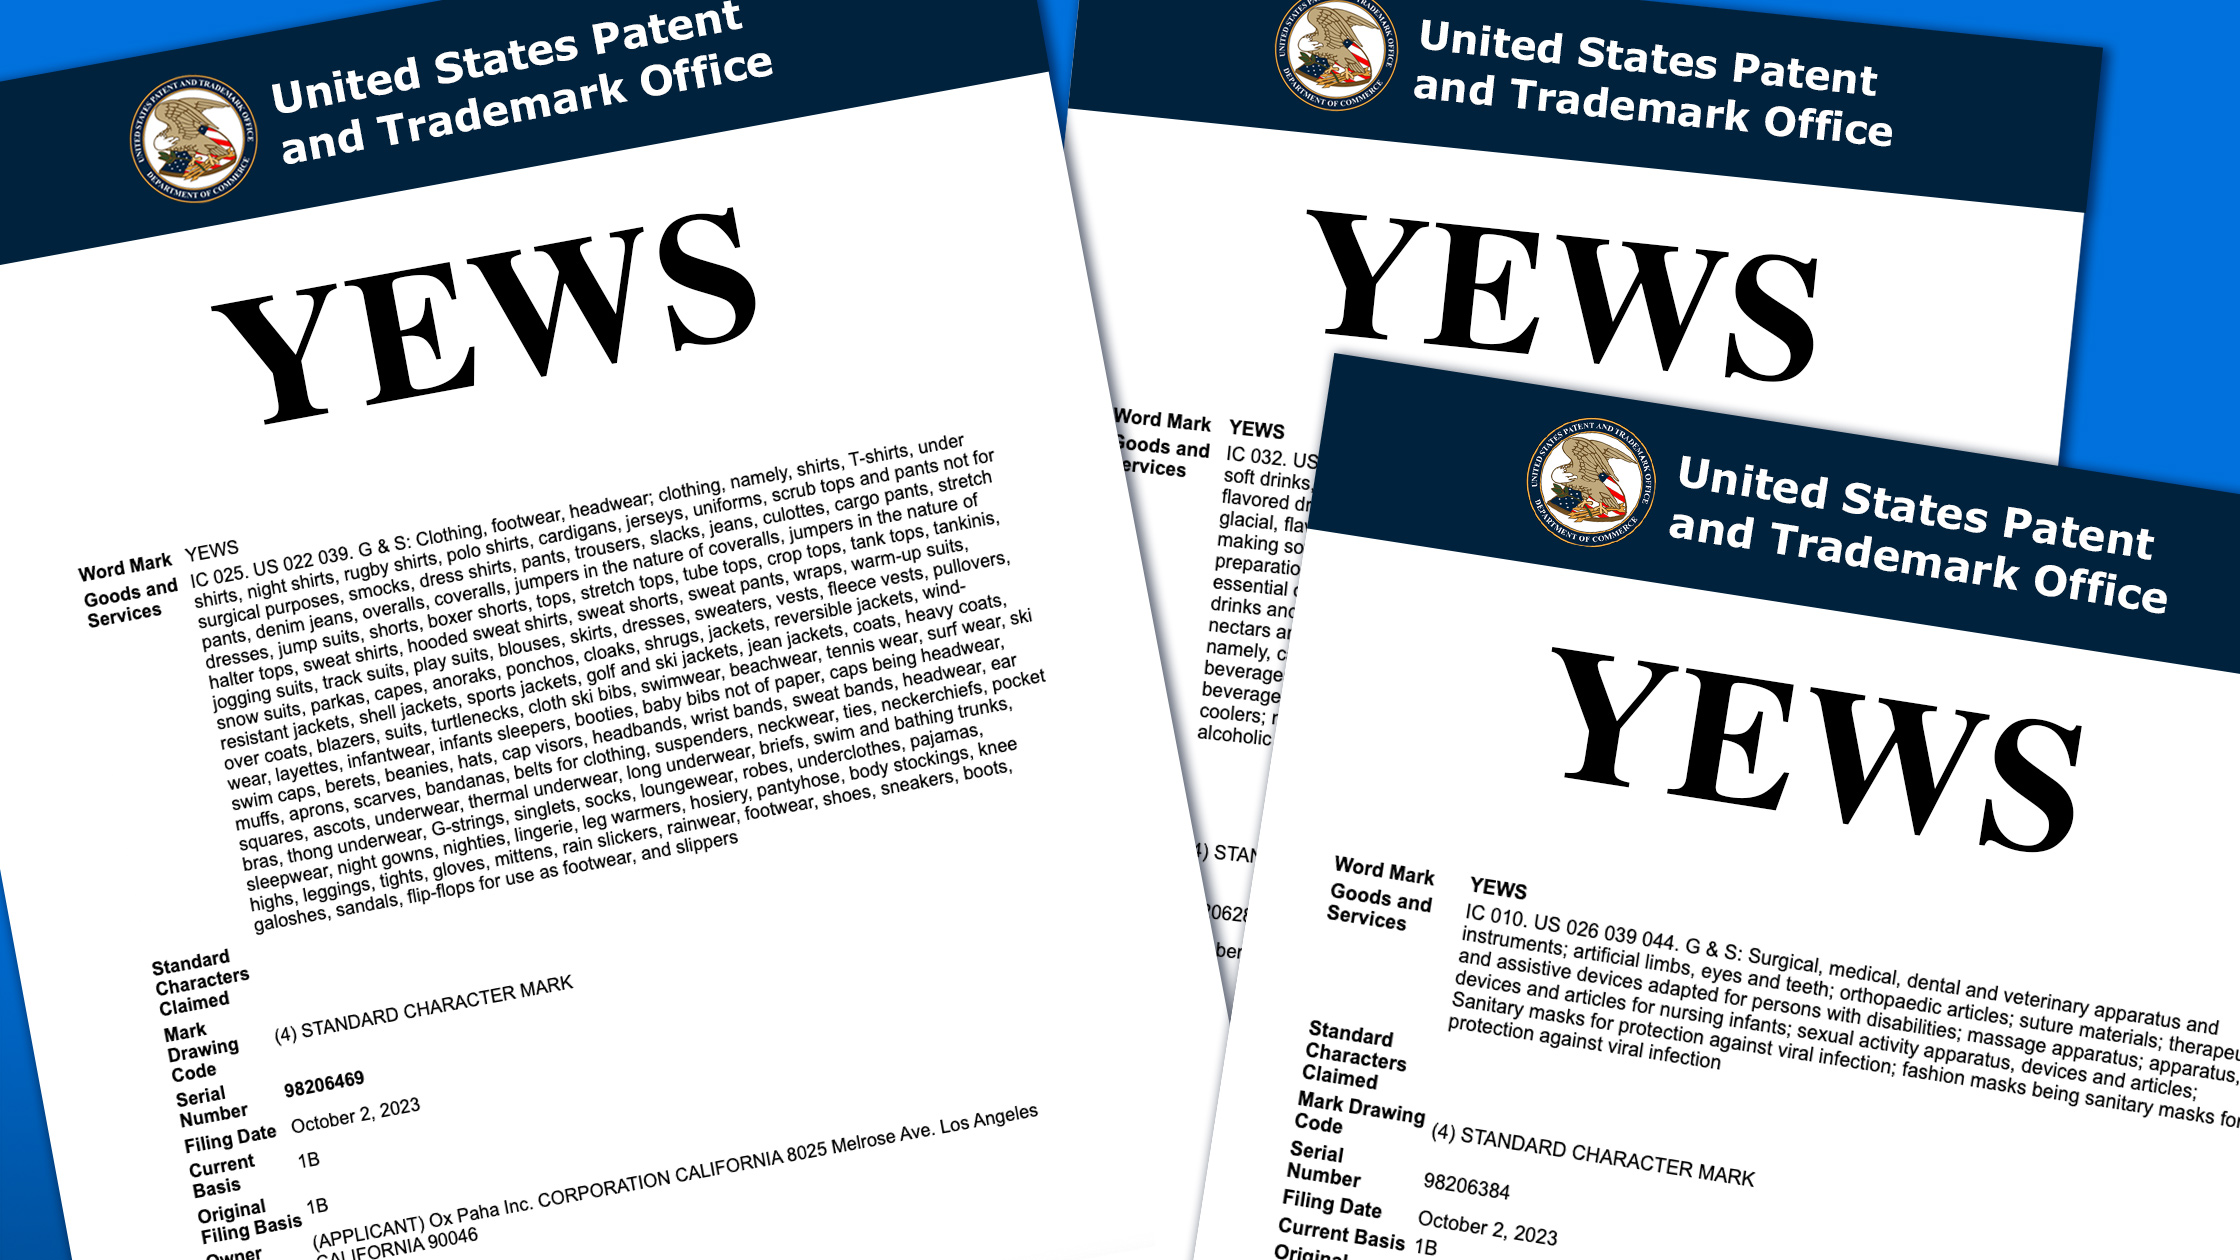 A few of Kanye's "YEWS" trademark applications